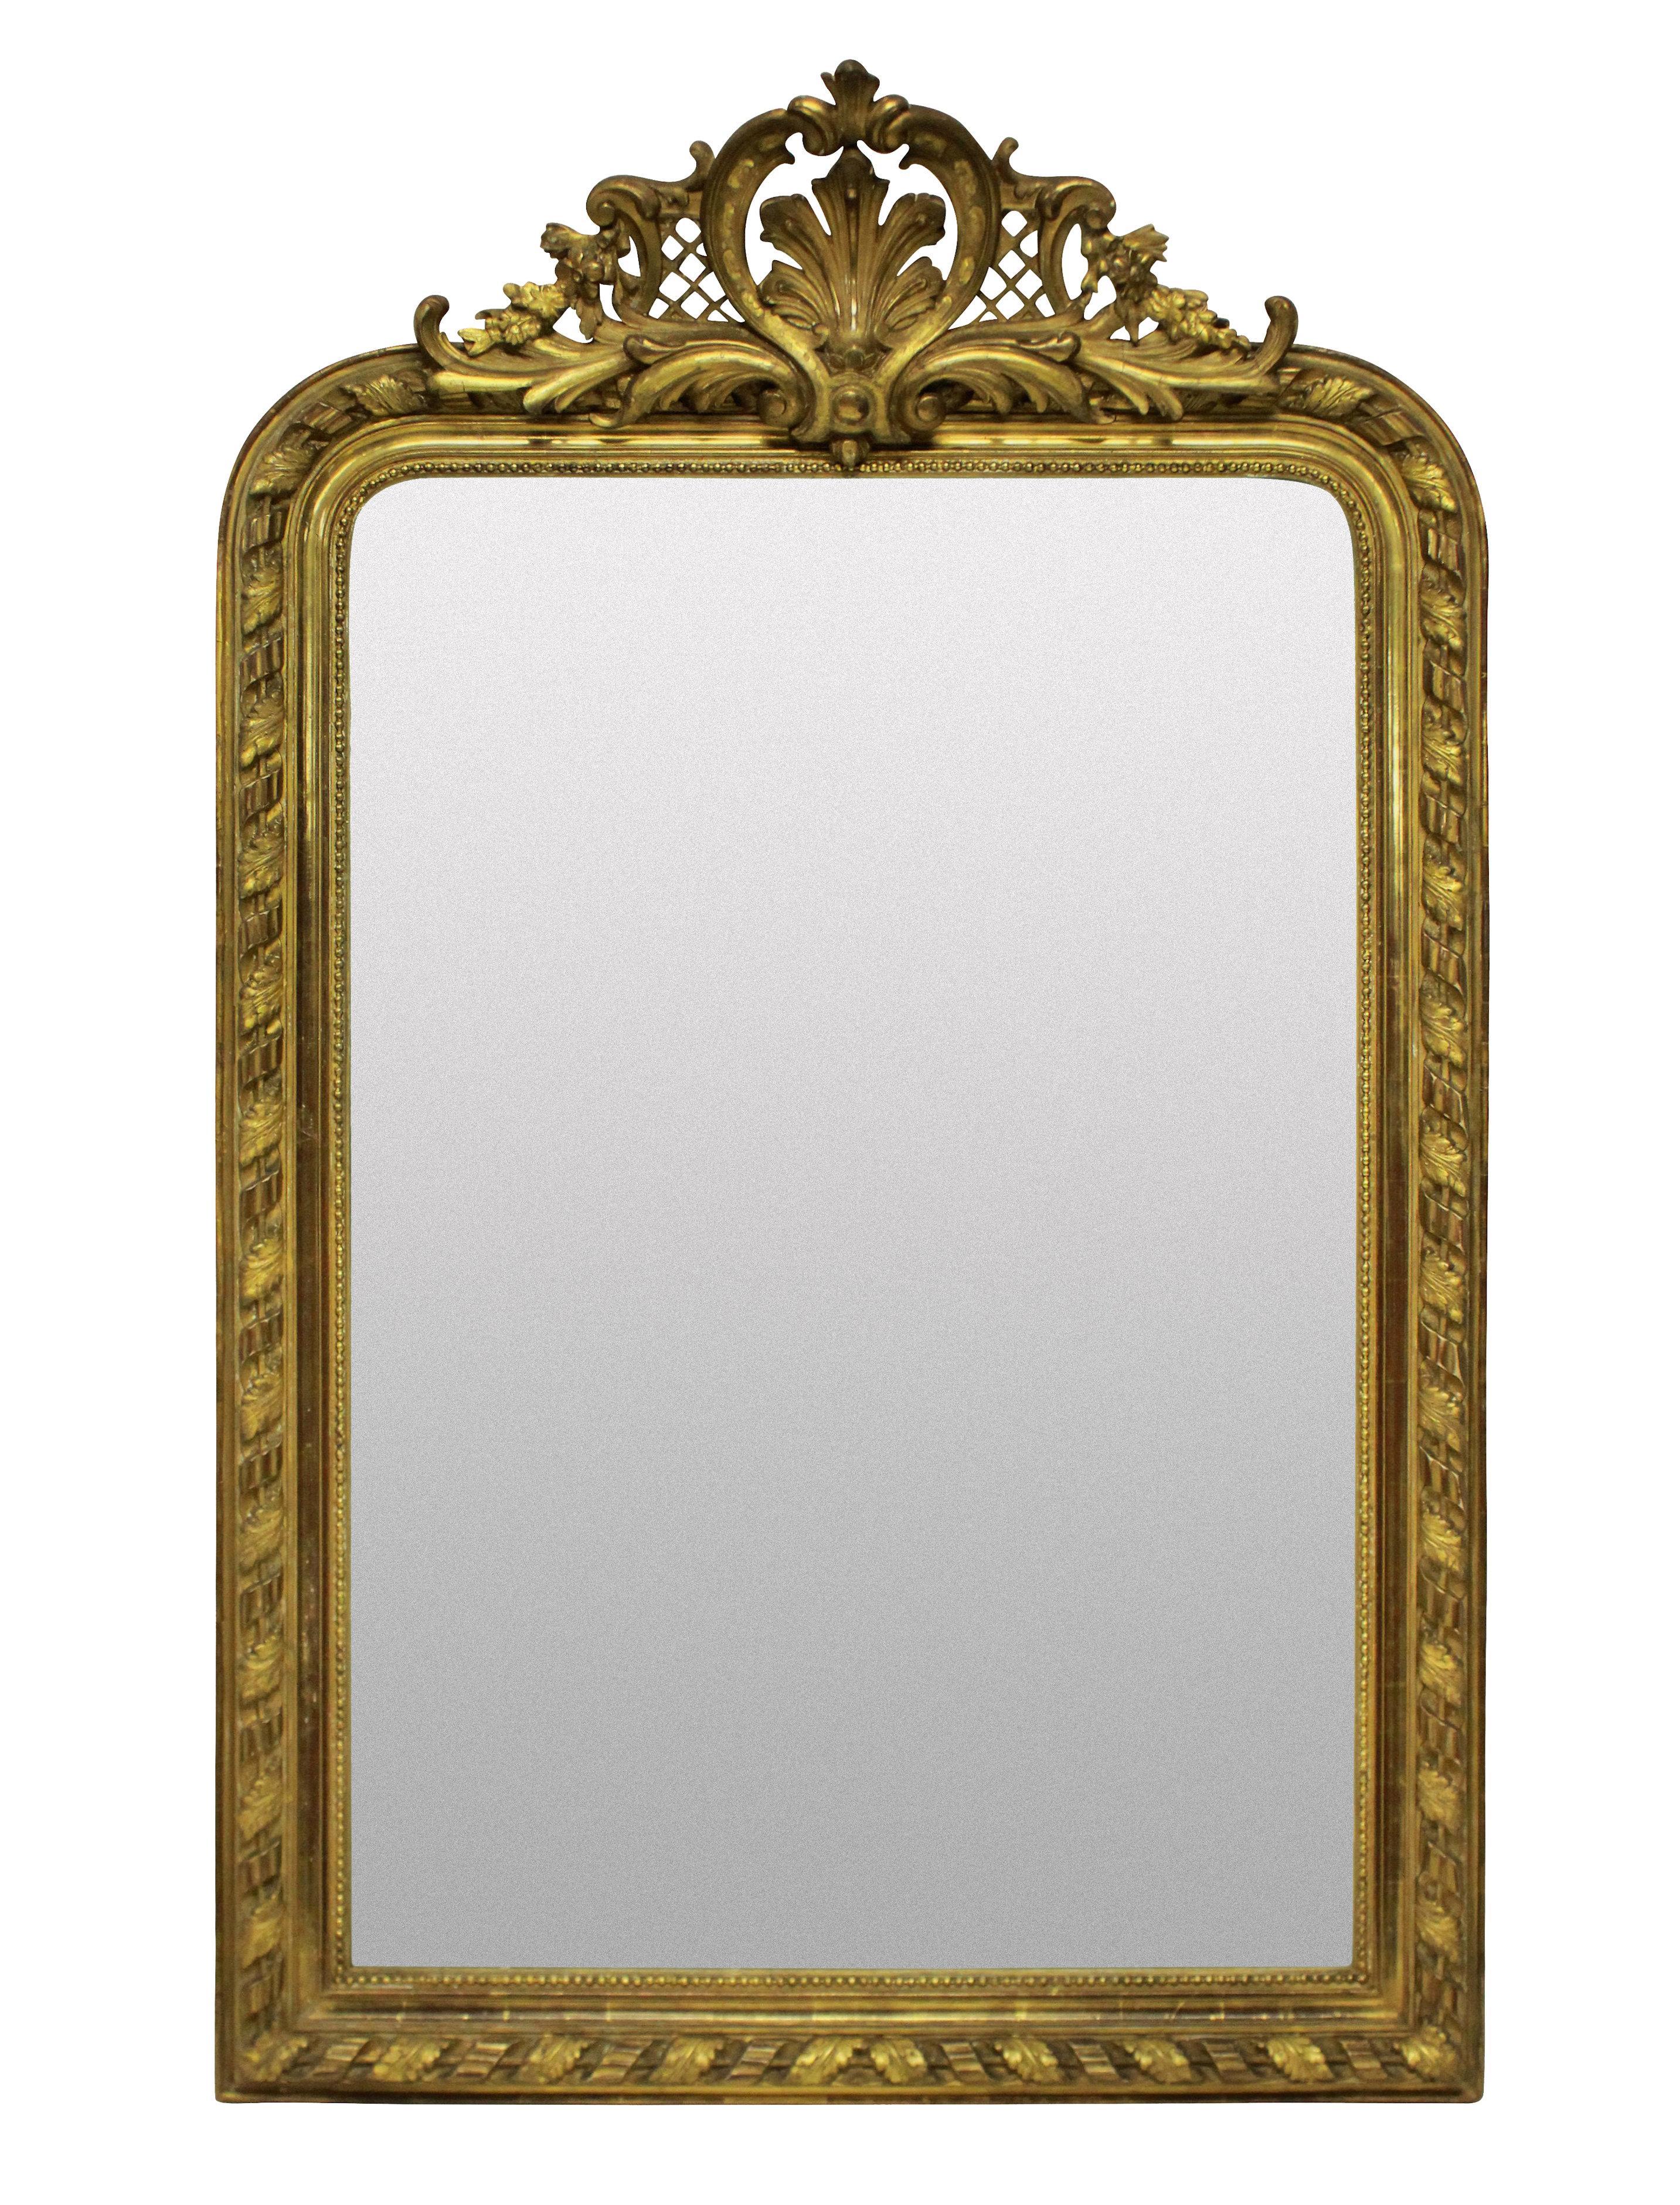 A fine French carved and water gilded overmantel (fireplace) mirror with carved and gesso central cartouche.

 